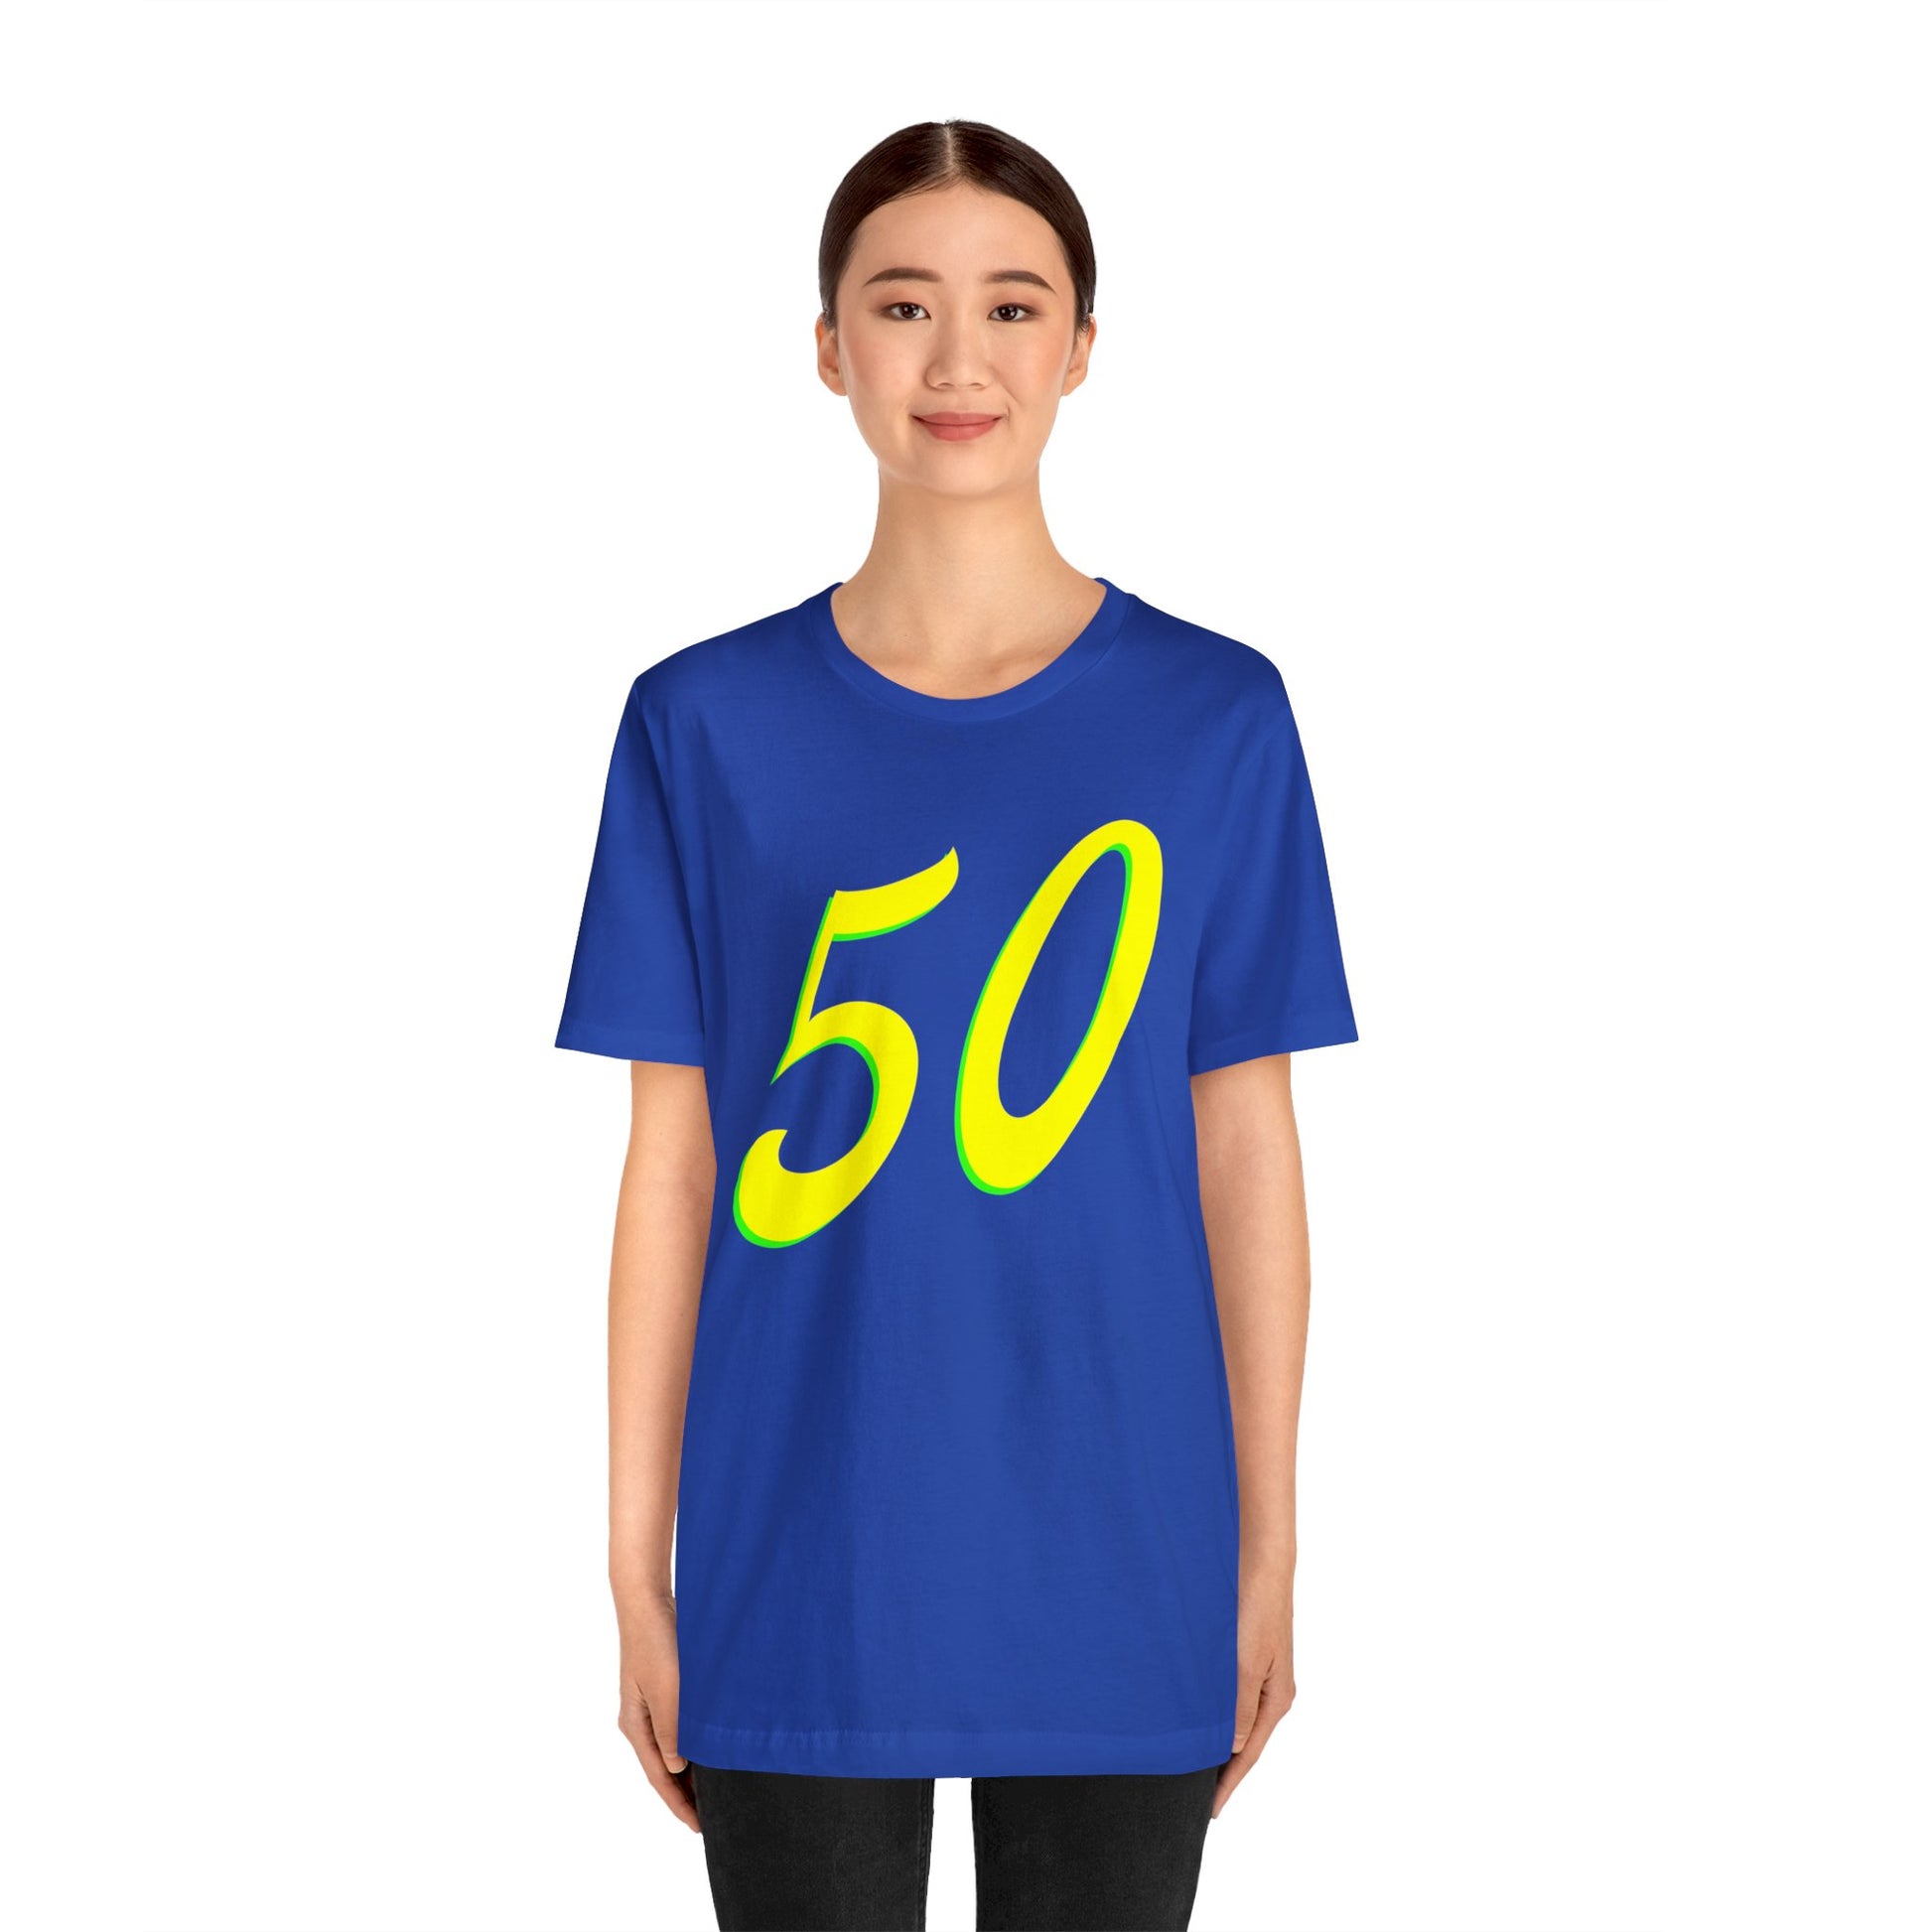 Number 50 Design - Soft Cotton Tee for birthdays and celebrations, Gift for friends and family, Multiple Options by clothezy.com in Gold Size Medium - Buy Now